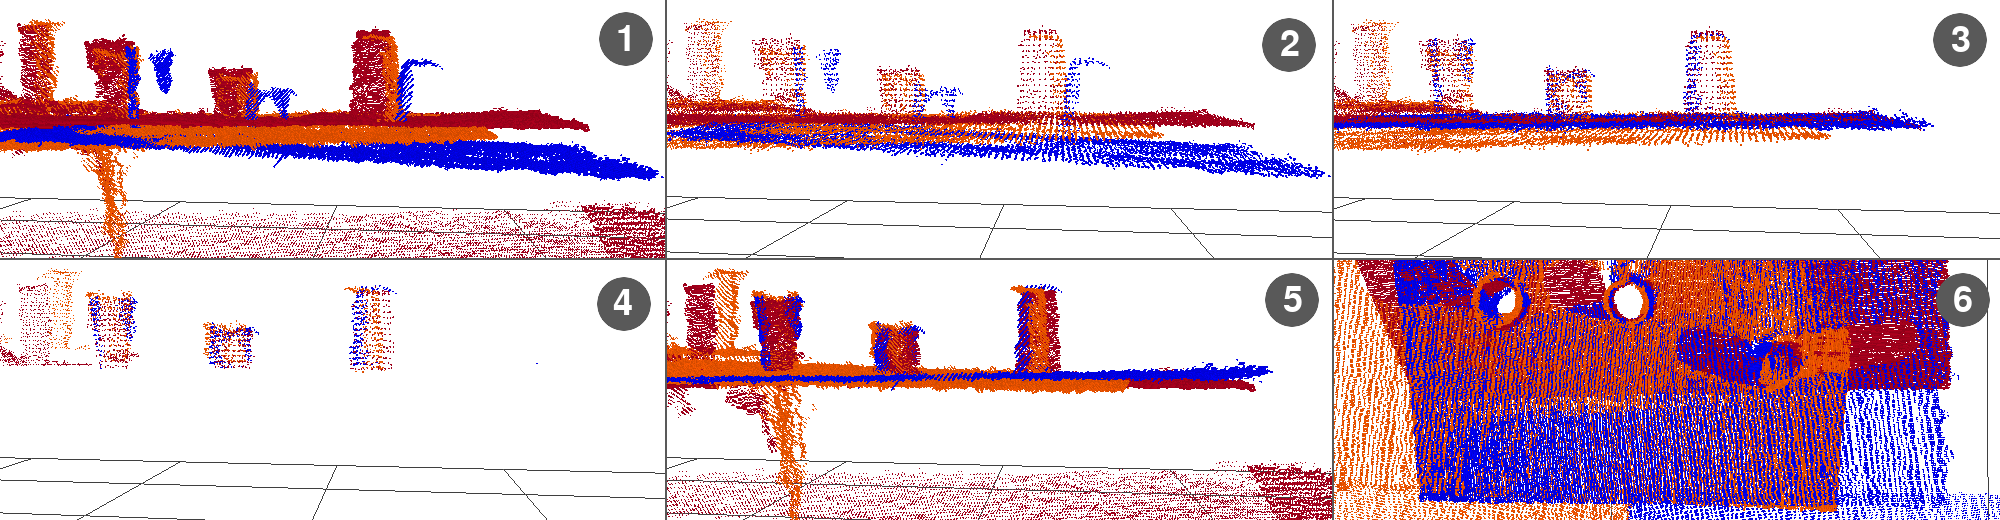 Merging point clouds stored in robot database.